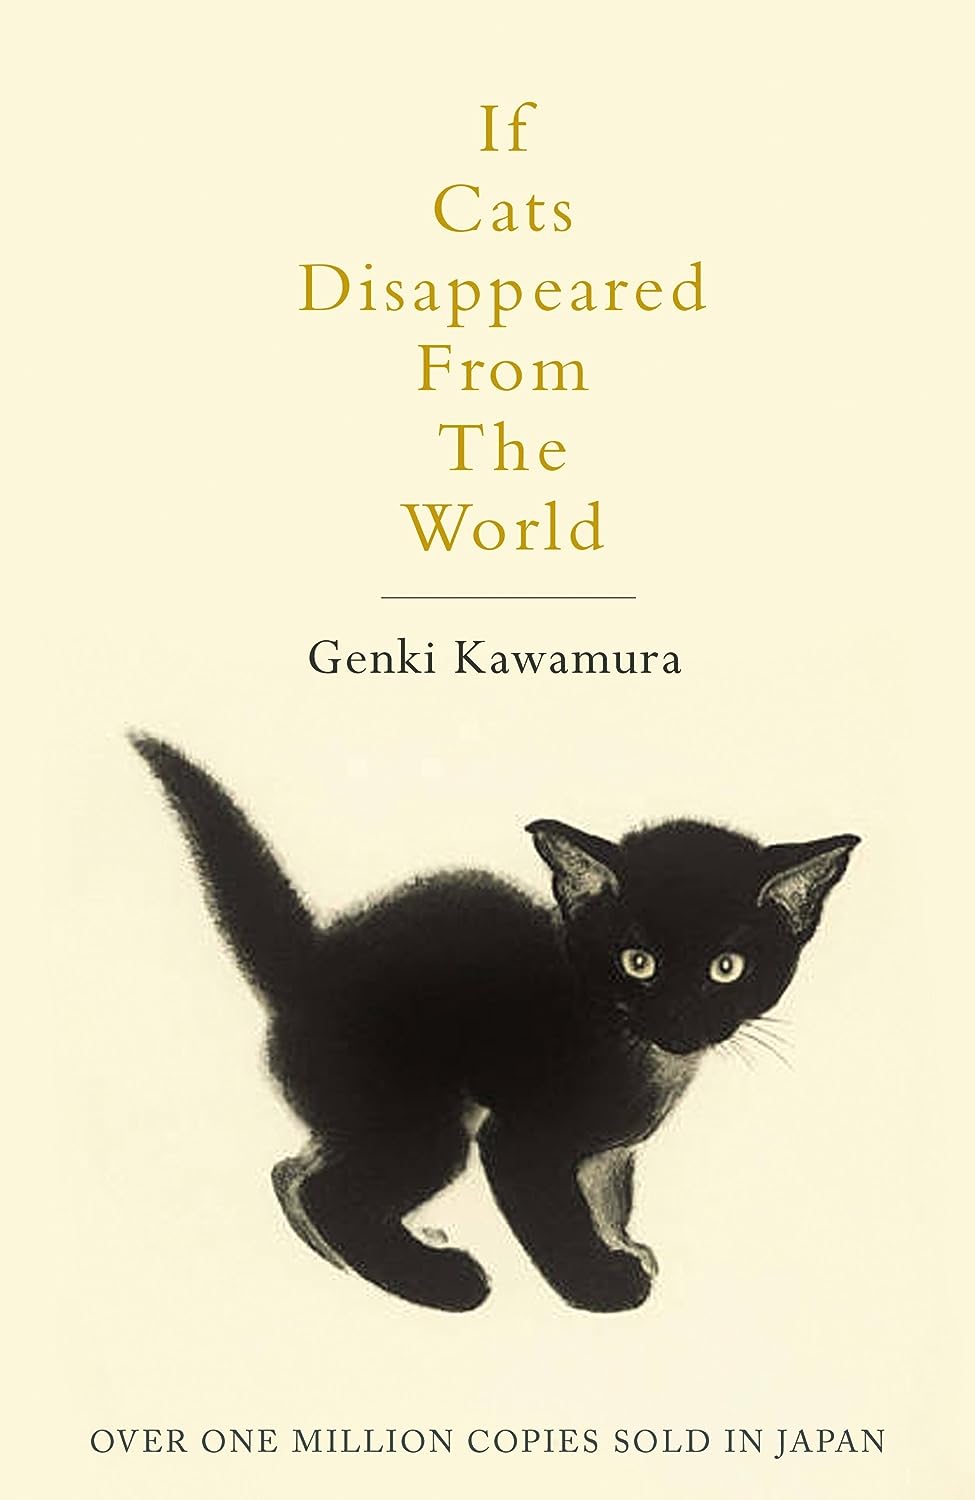 Cover of "If Cats Disappeared from the World" by Genki Kawamura